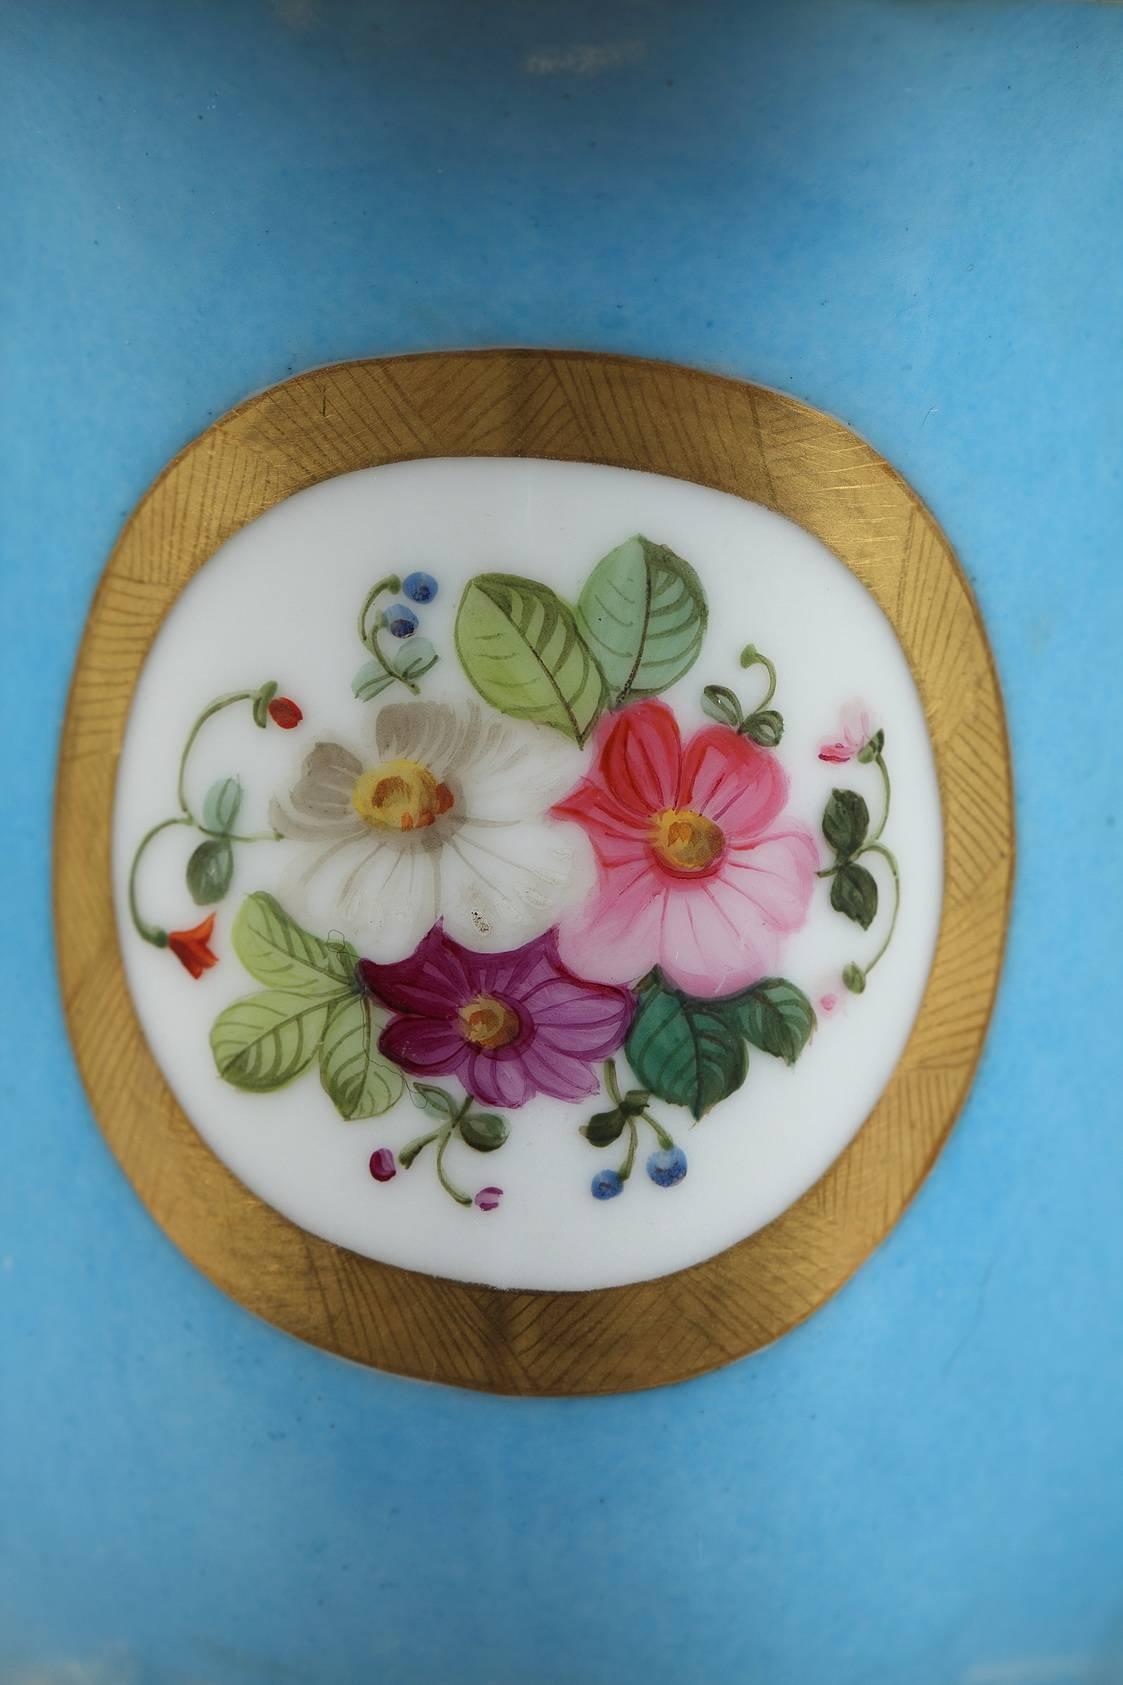 Napoleon III oval, light blue porcelain jardinière. It is decorated with polychromatic floral motifs on white medallions framed in a gold-colored border. The piece rests on a gilt bronze rocaille base. Marked underneath in green: L,

circa